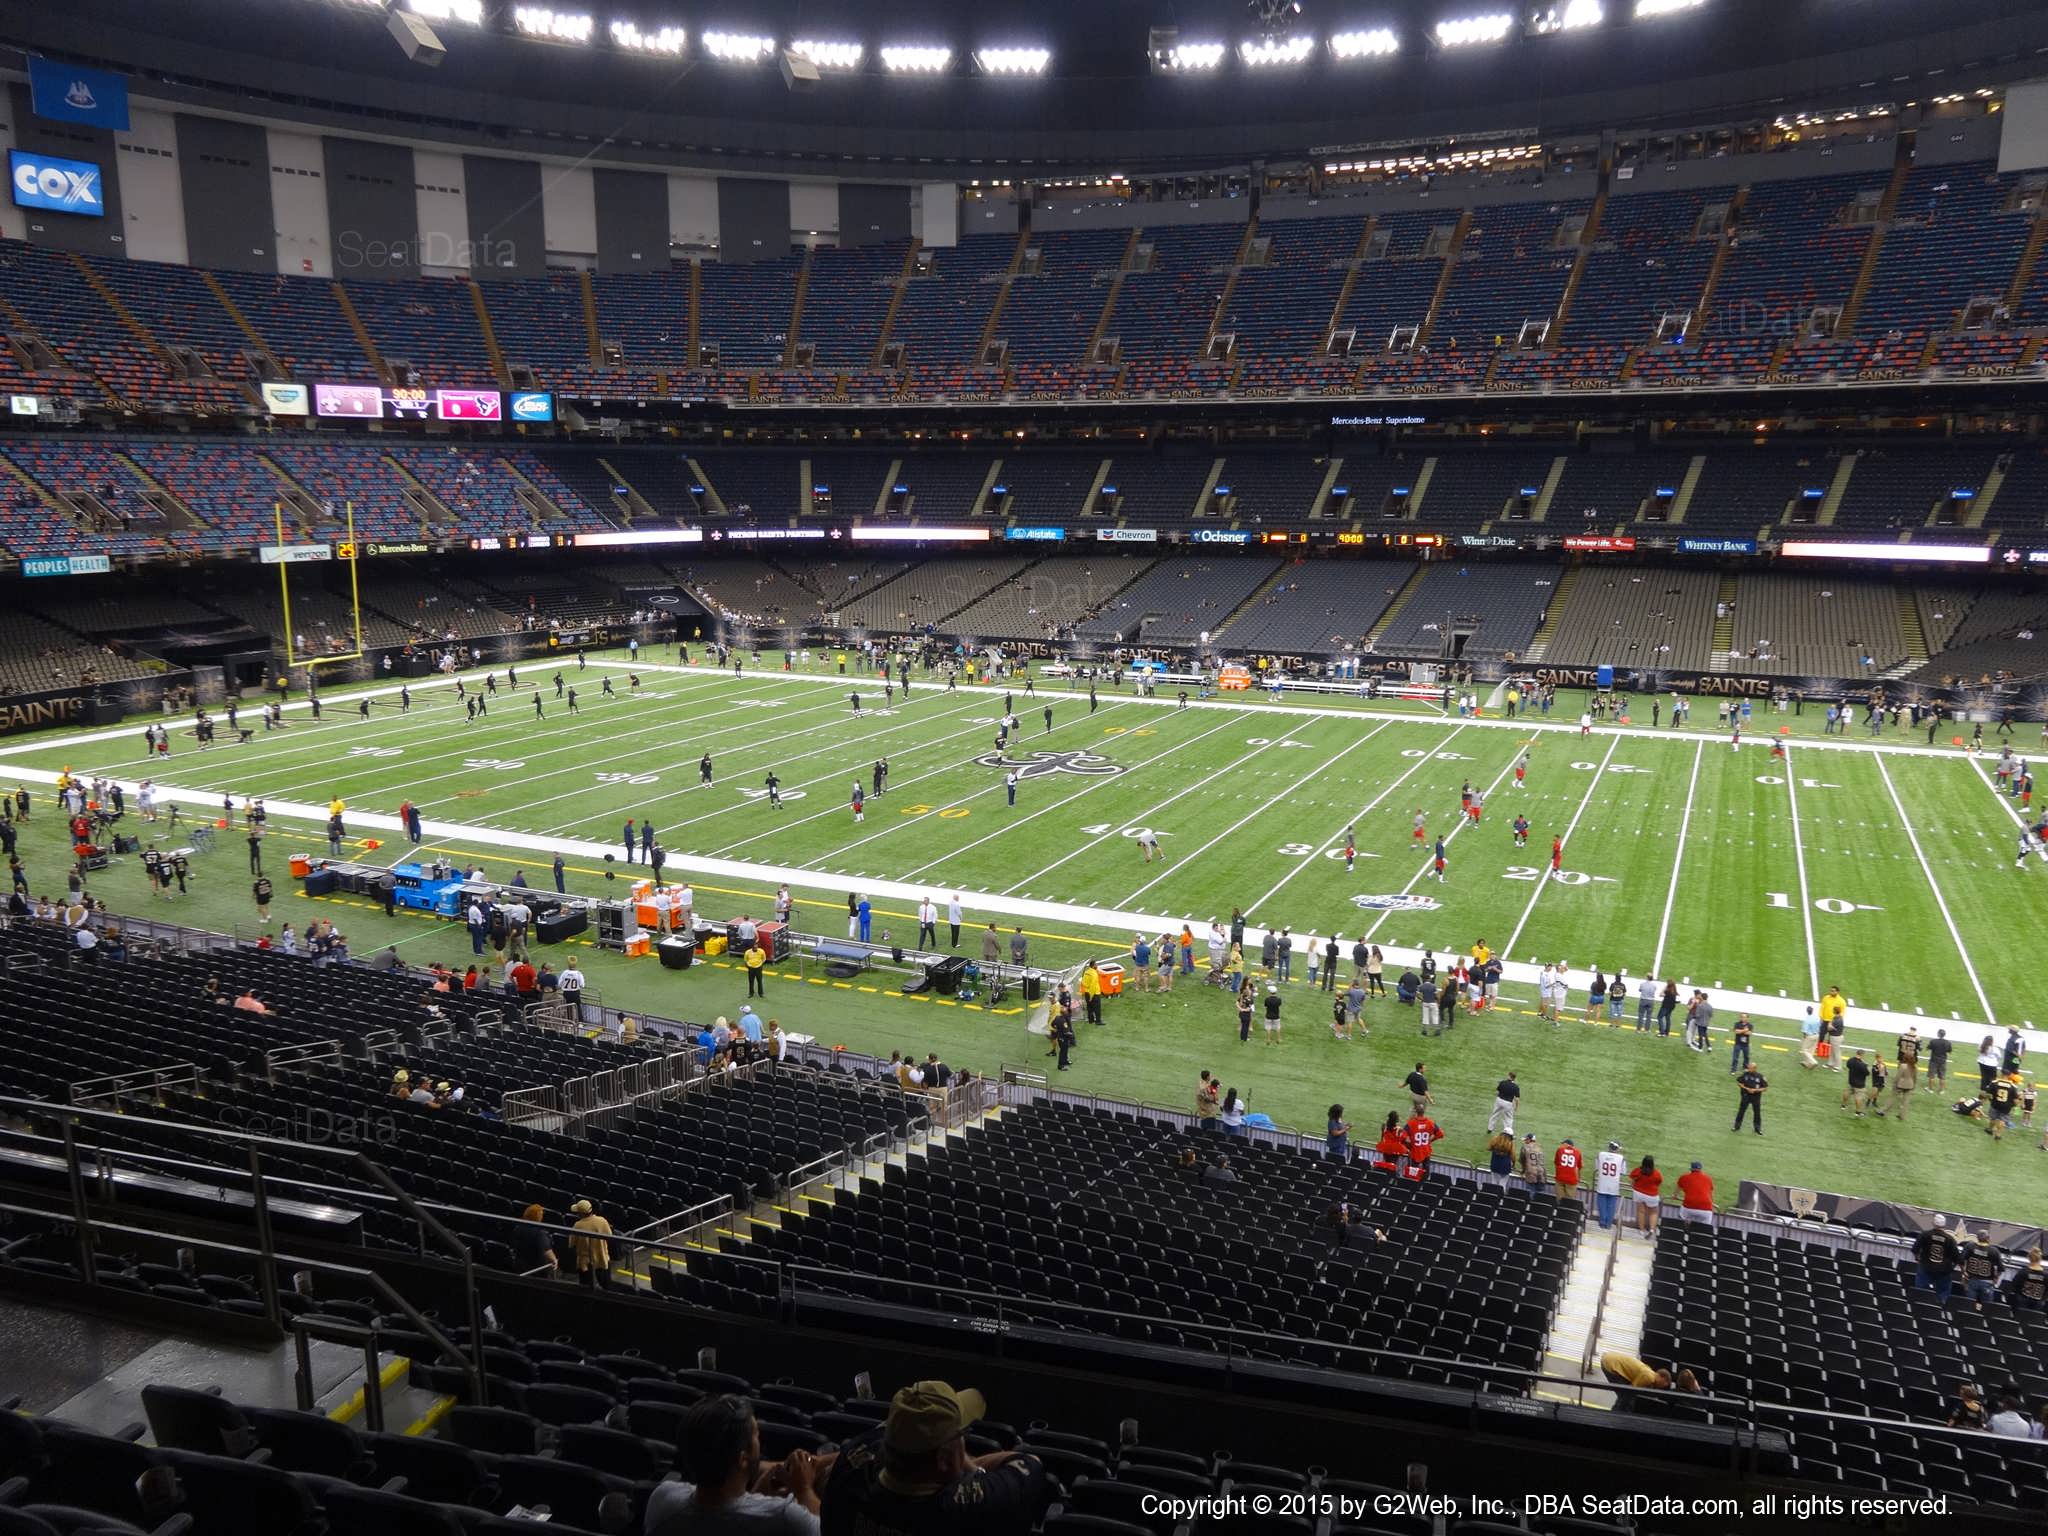 Seat view from section 309 at the Mercedes-Benz Superdome, home of the New Orleans Saints